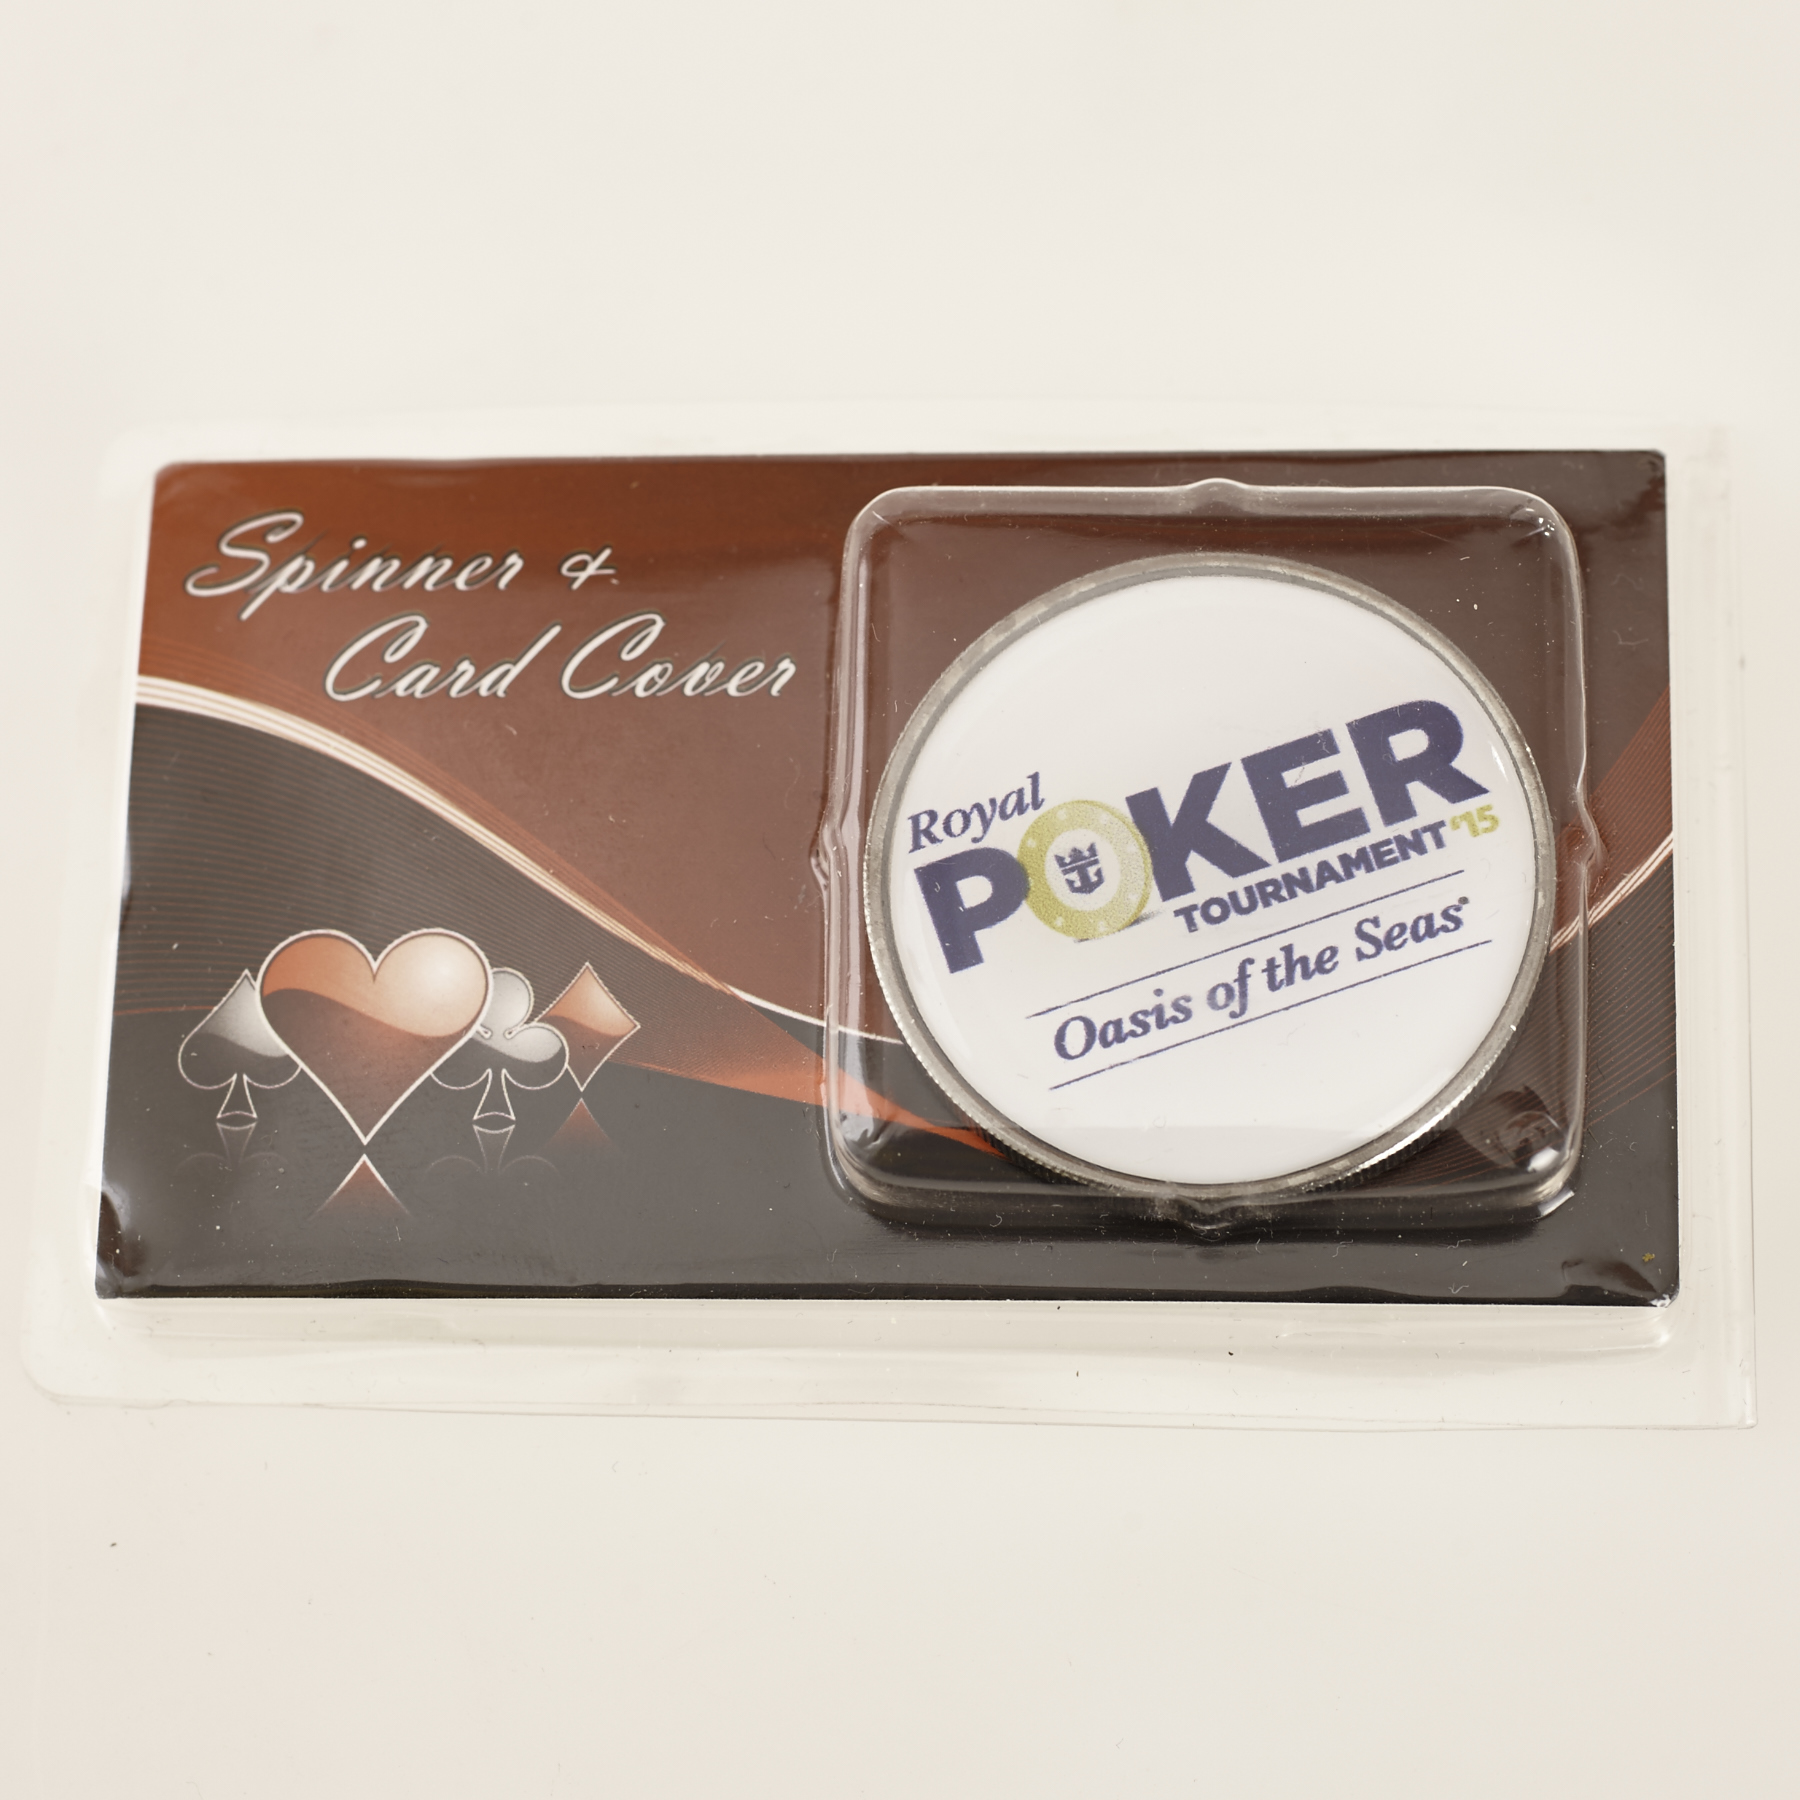 ROYAL POKER TOURNAMENT, OASIS OF THE SEAS  2015, Poker Card Guard Spinner